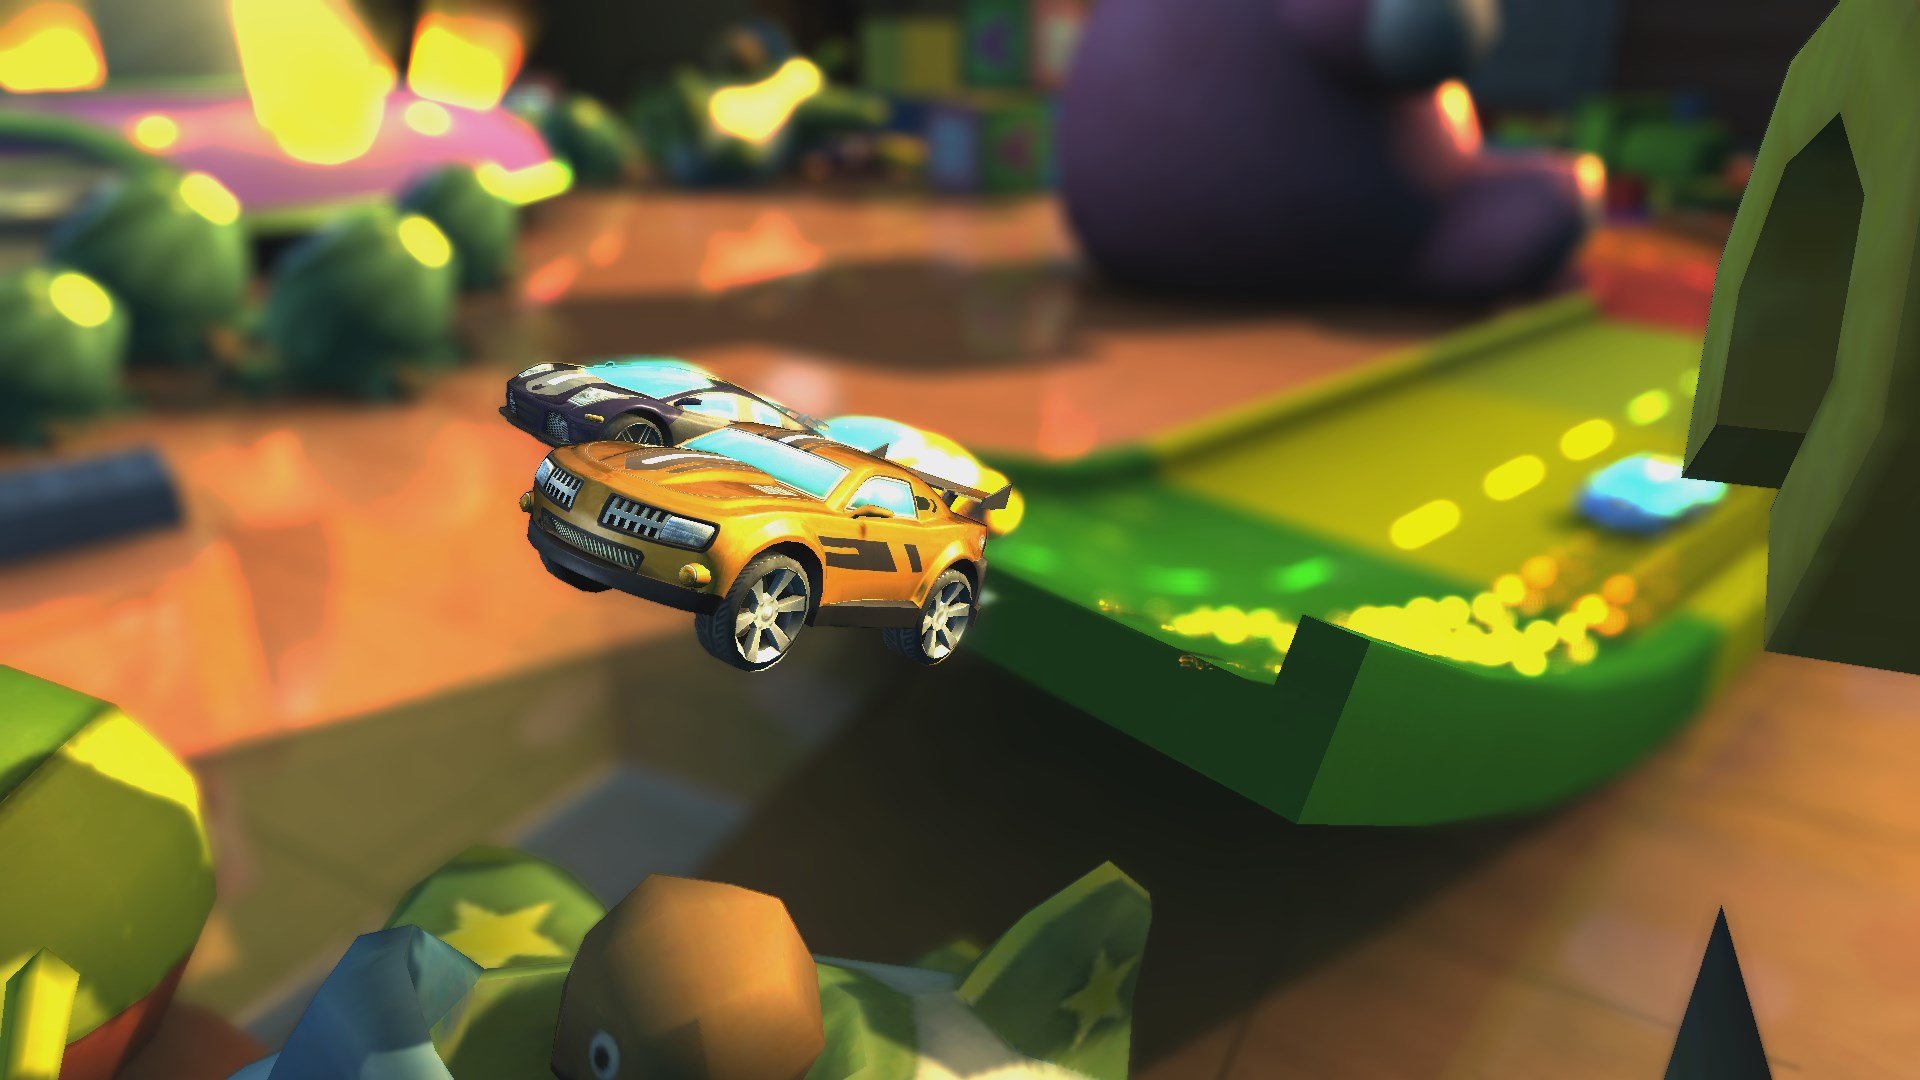 Super Toy Cars cover image